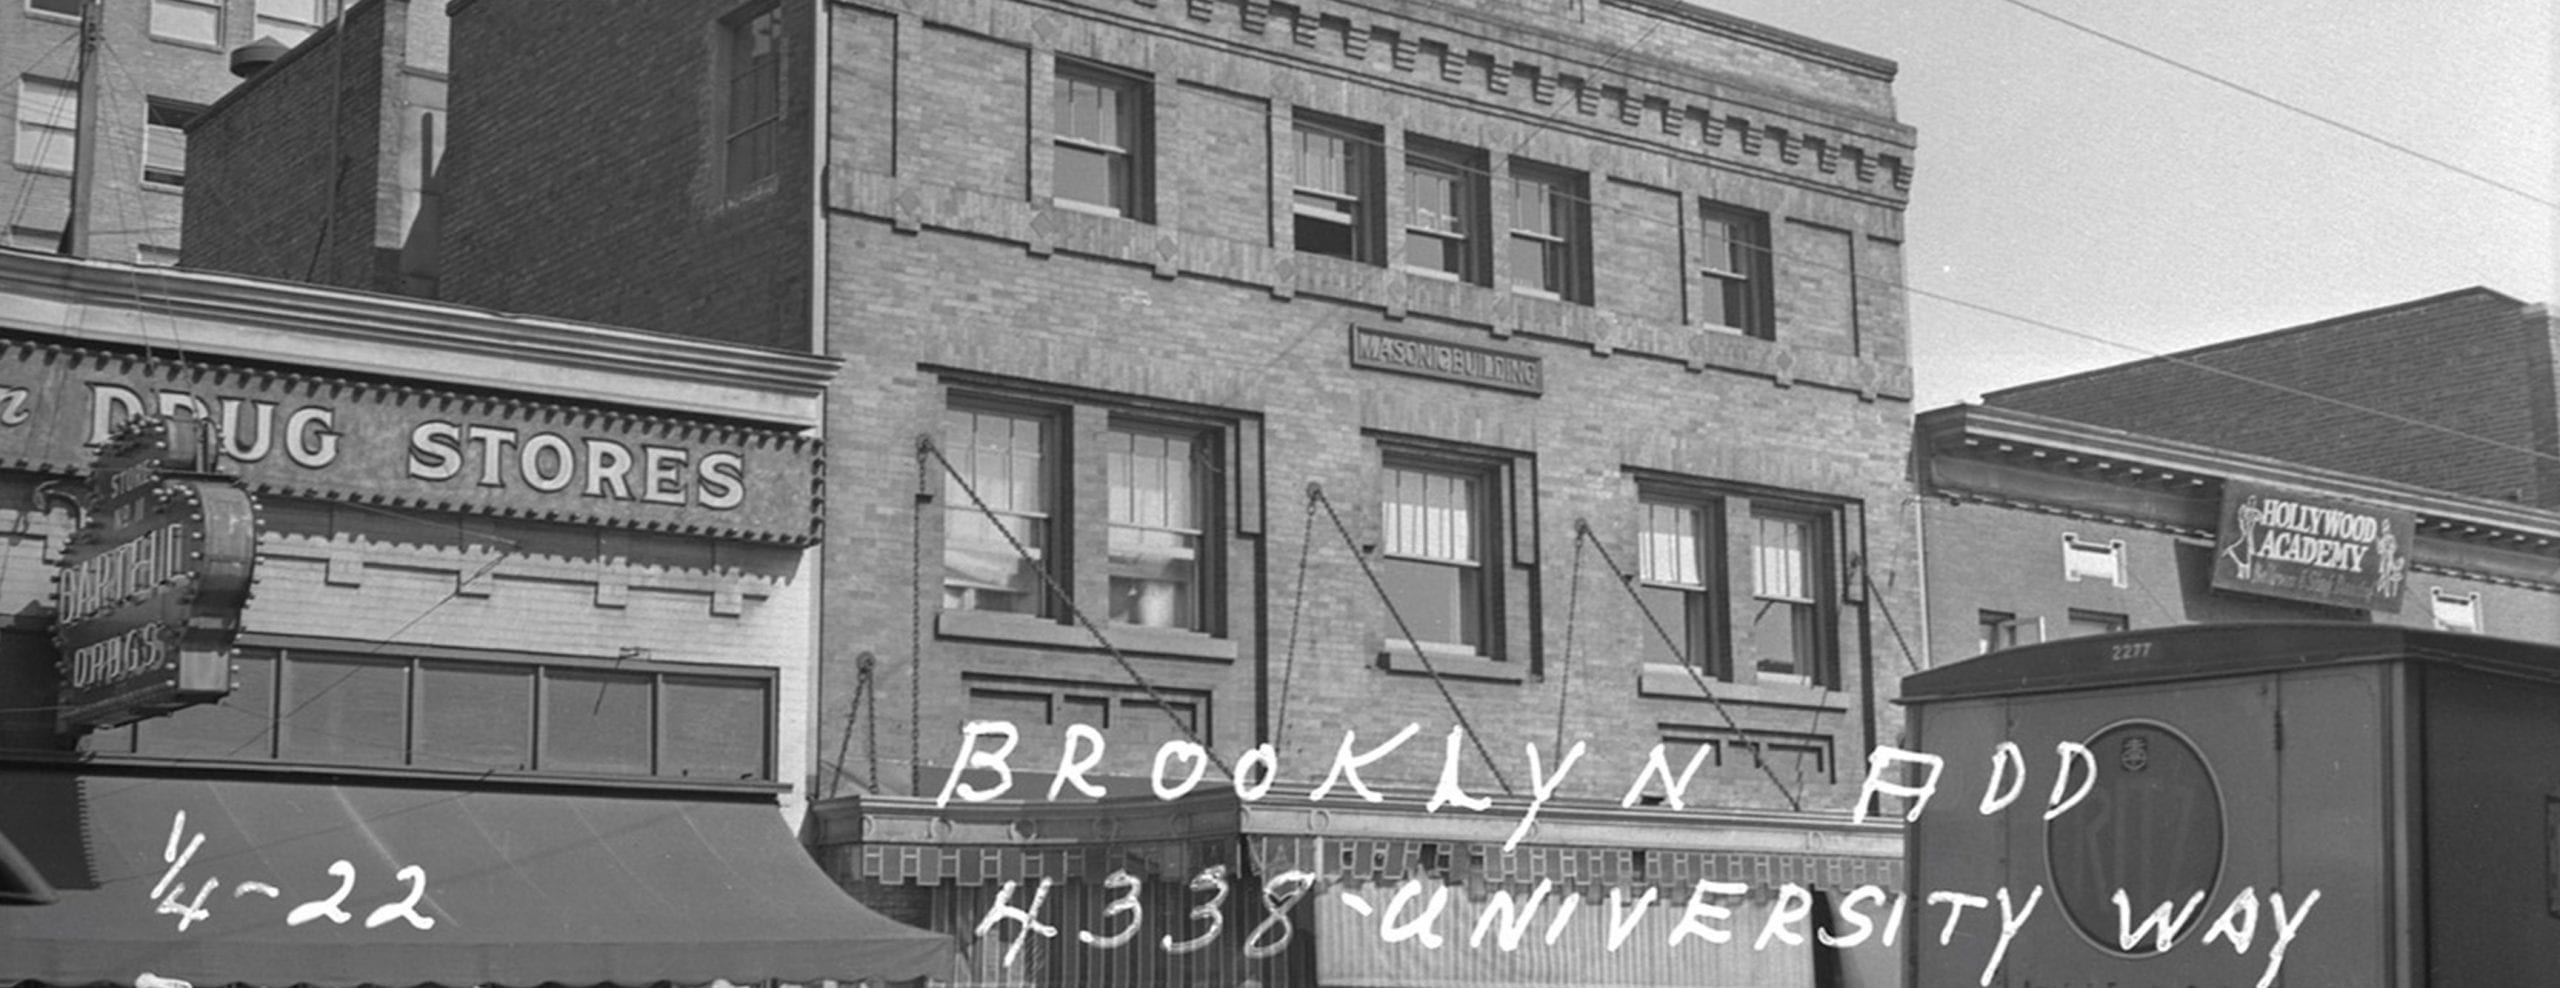 A historic black and white photograph off the University Masonic Lodge. It is a three-story brick building, and the photo is captioned with the address "4338 University Way NE"